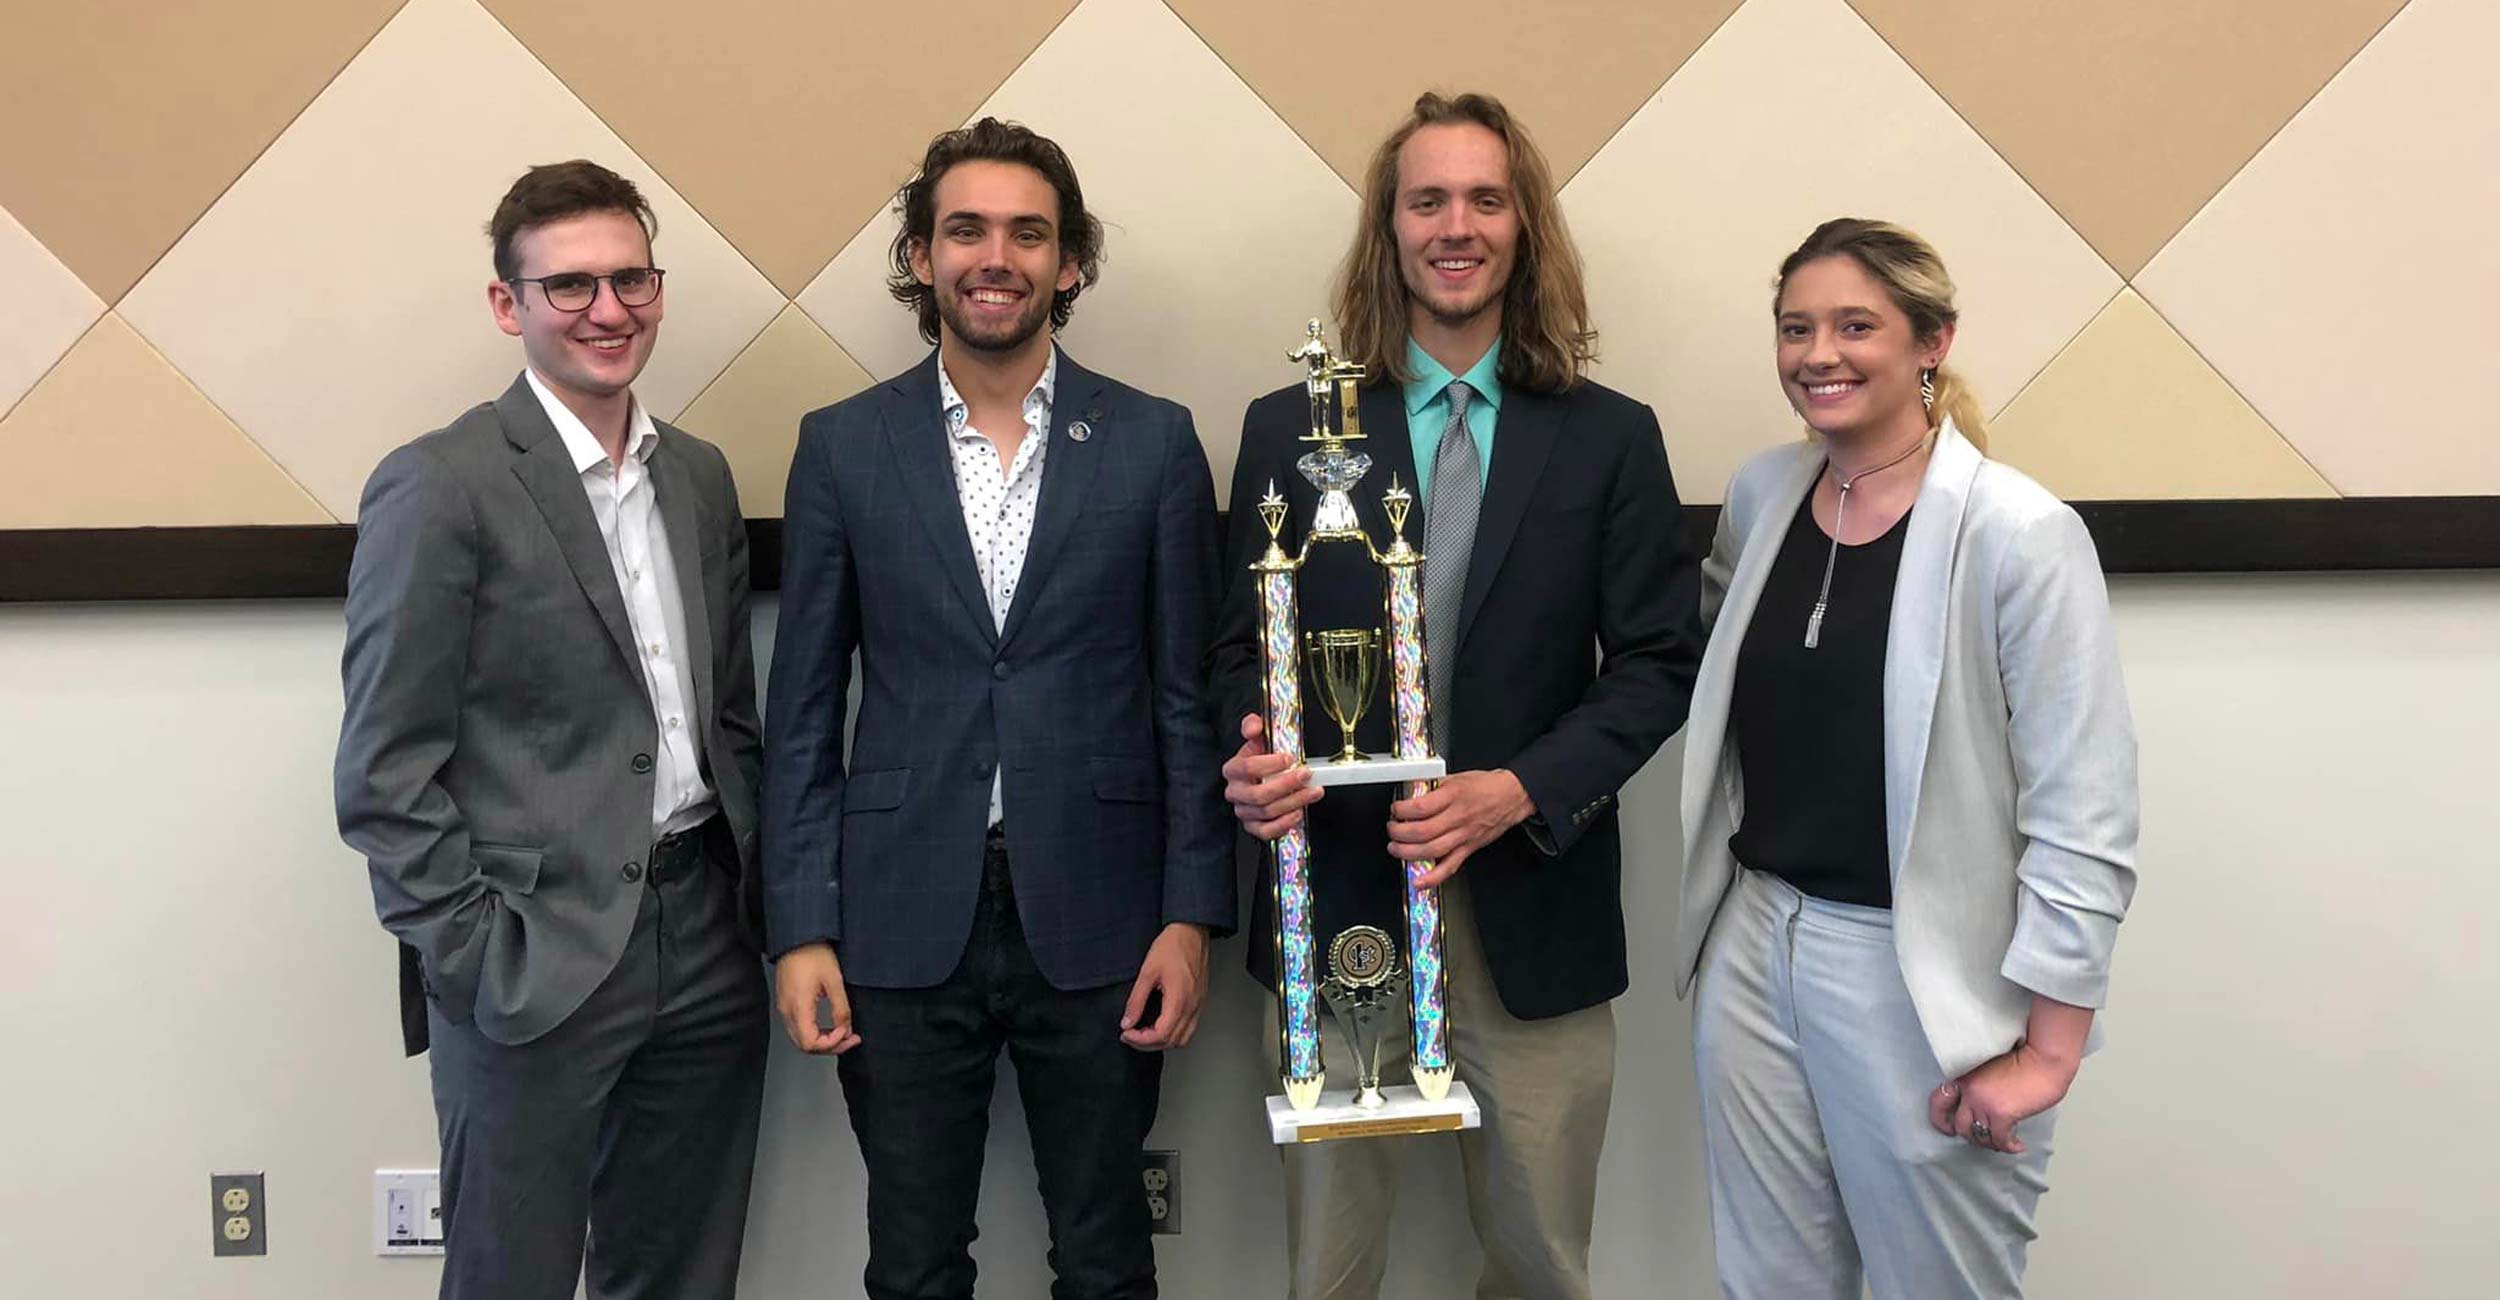 OSU Ethics Bowl Team wins regional competition, qualifies for nationals